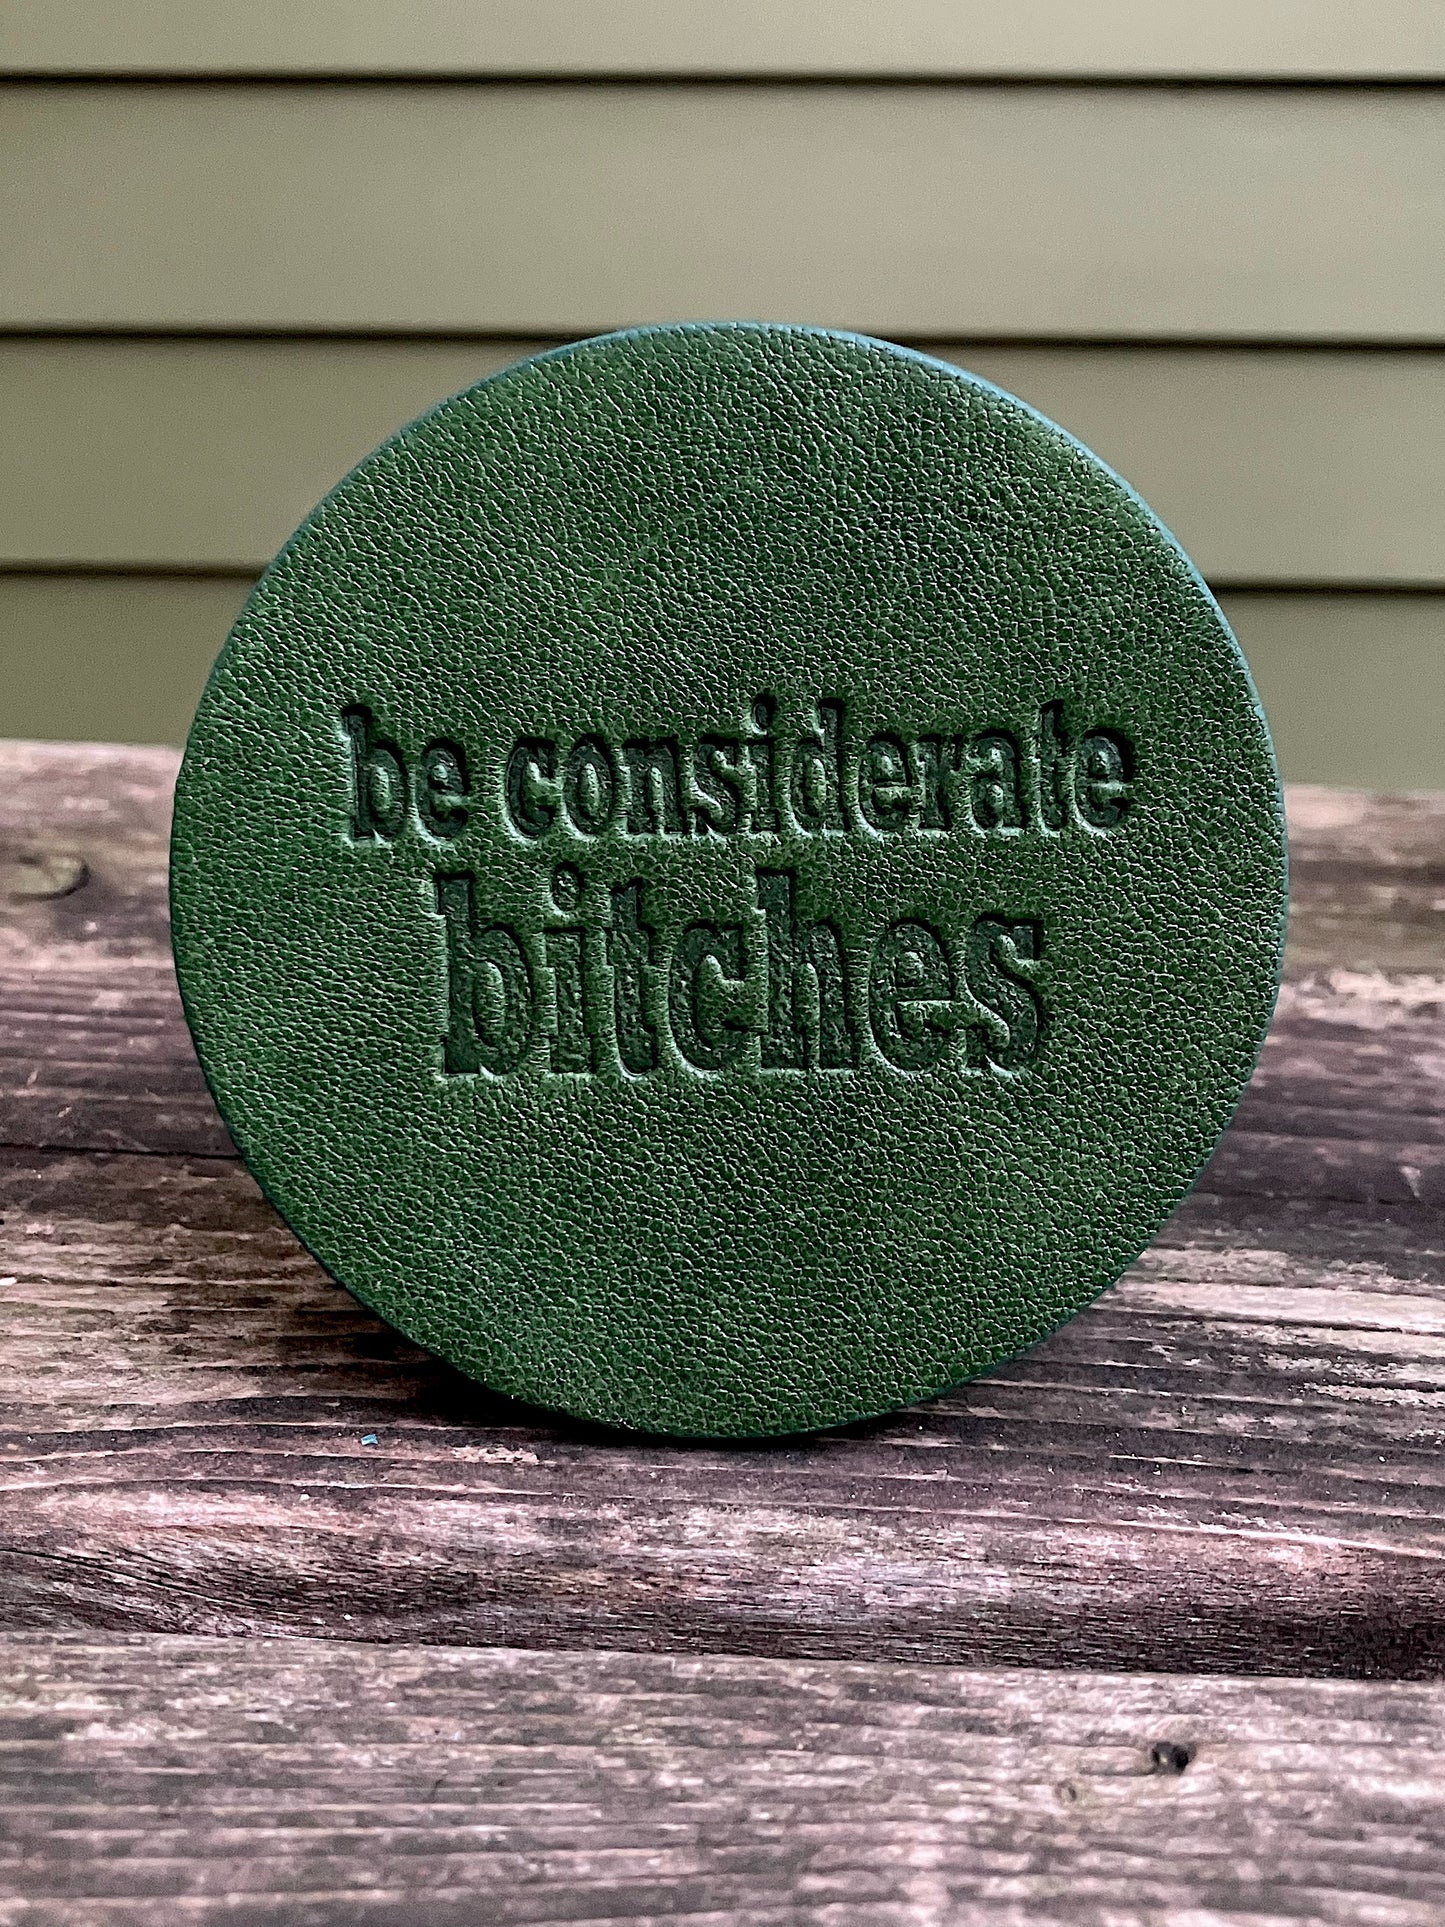 Leather Coaster - Be Considerate Bitches